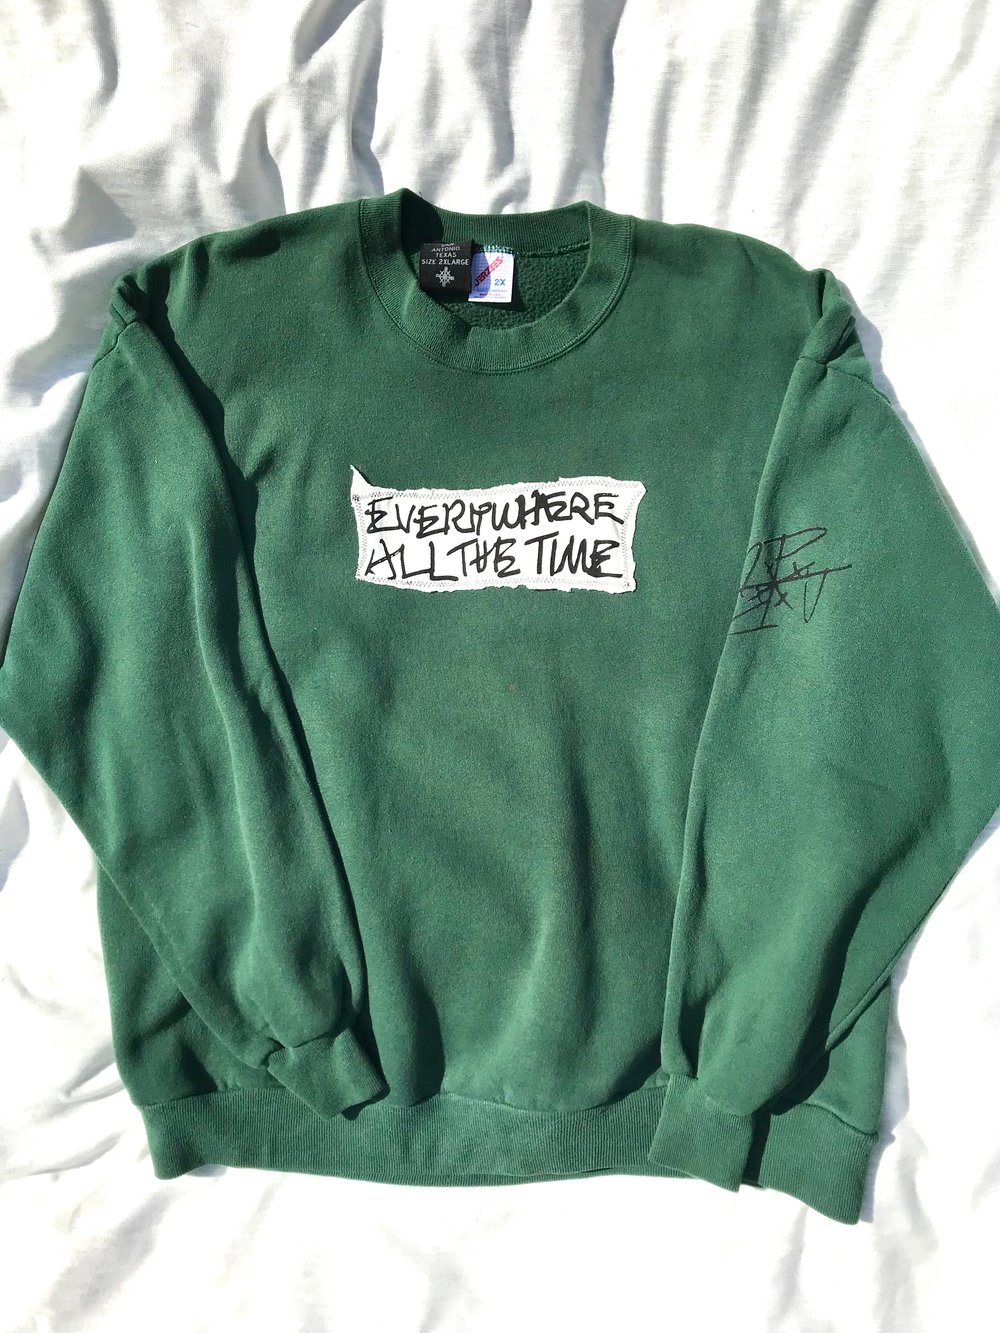 DWS dude sweater in forest green 